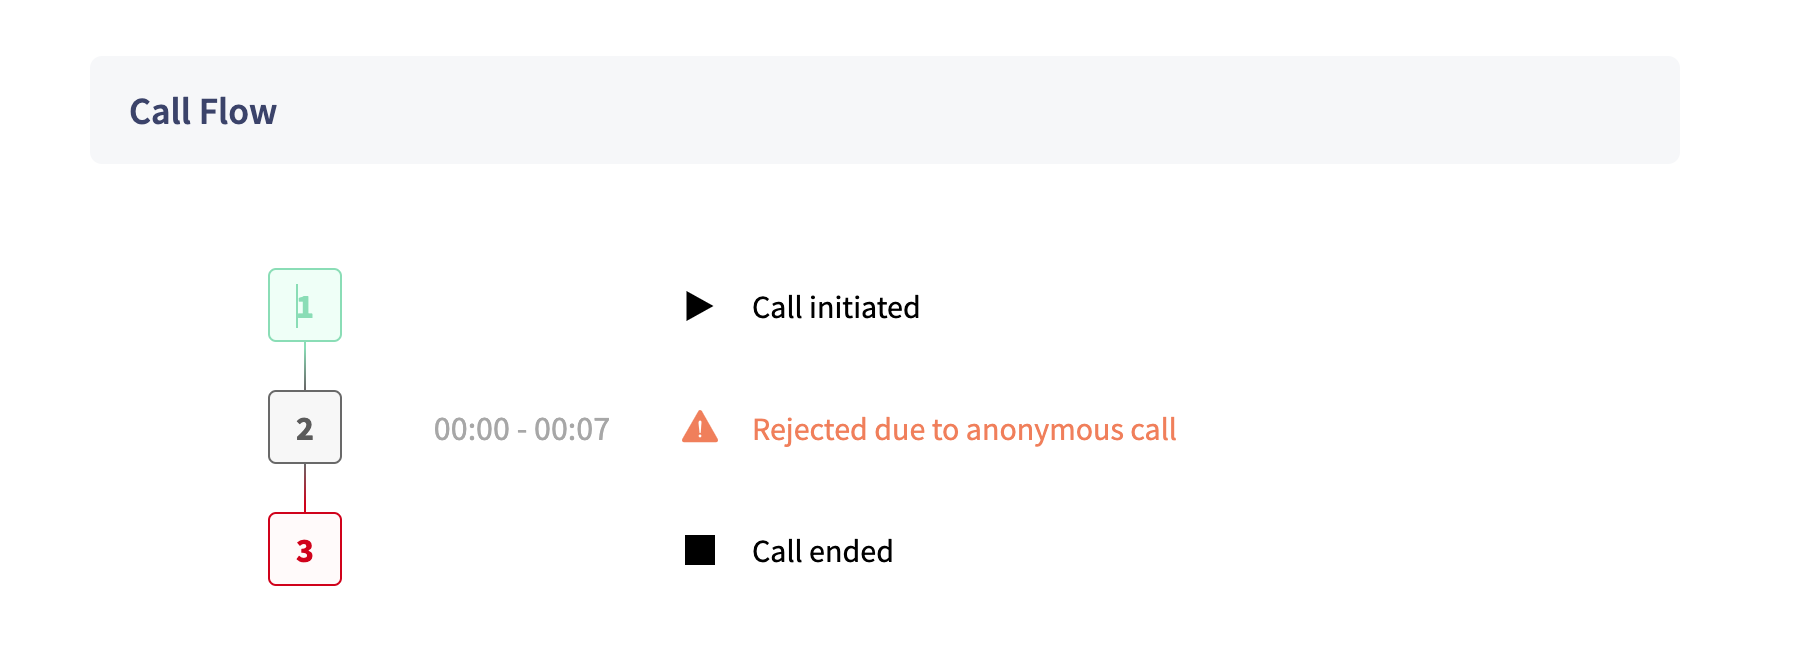 Rejected call